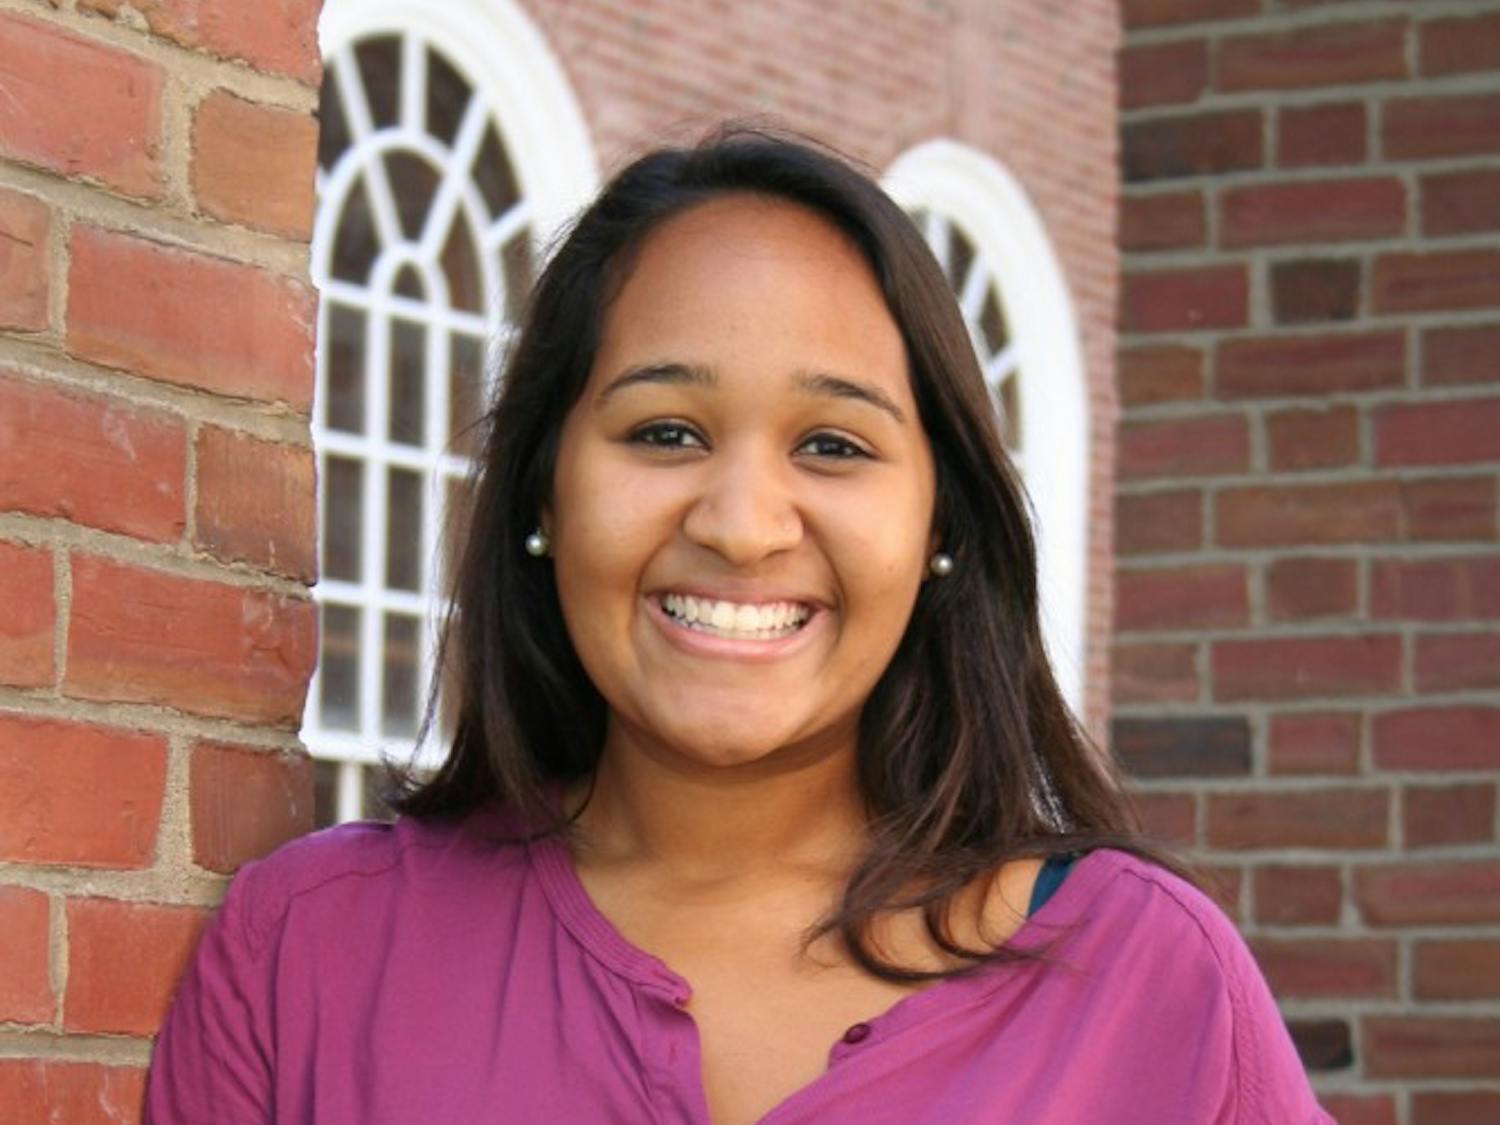 Casidhe-Nicole Bethancourt reflects on lessons learned during her time at Dartmouth.